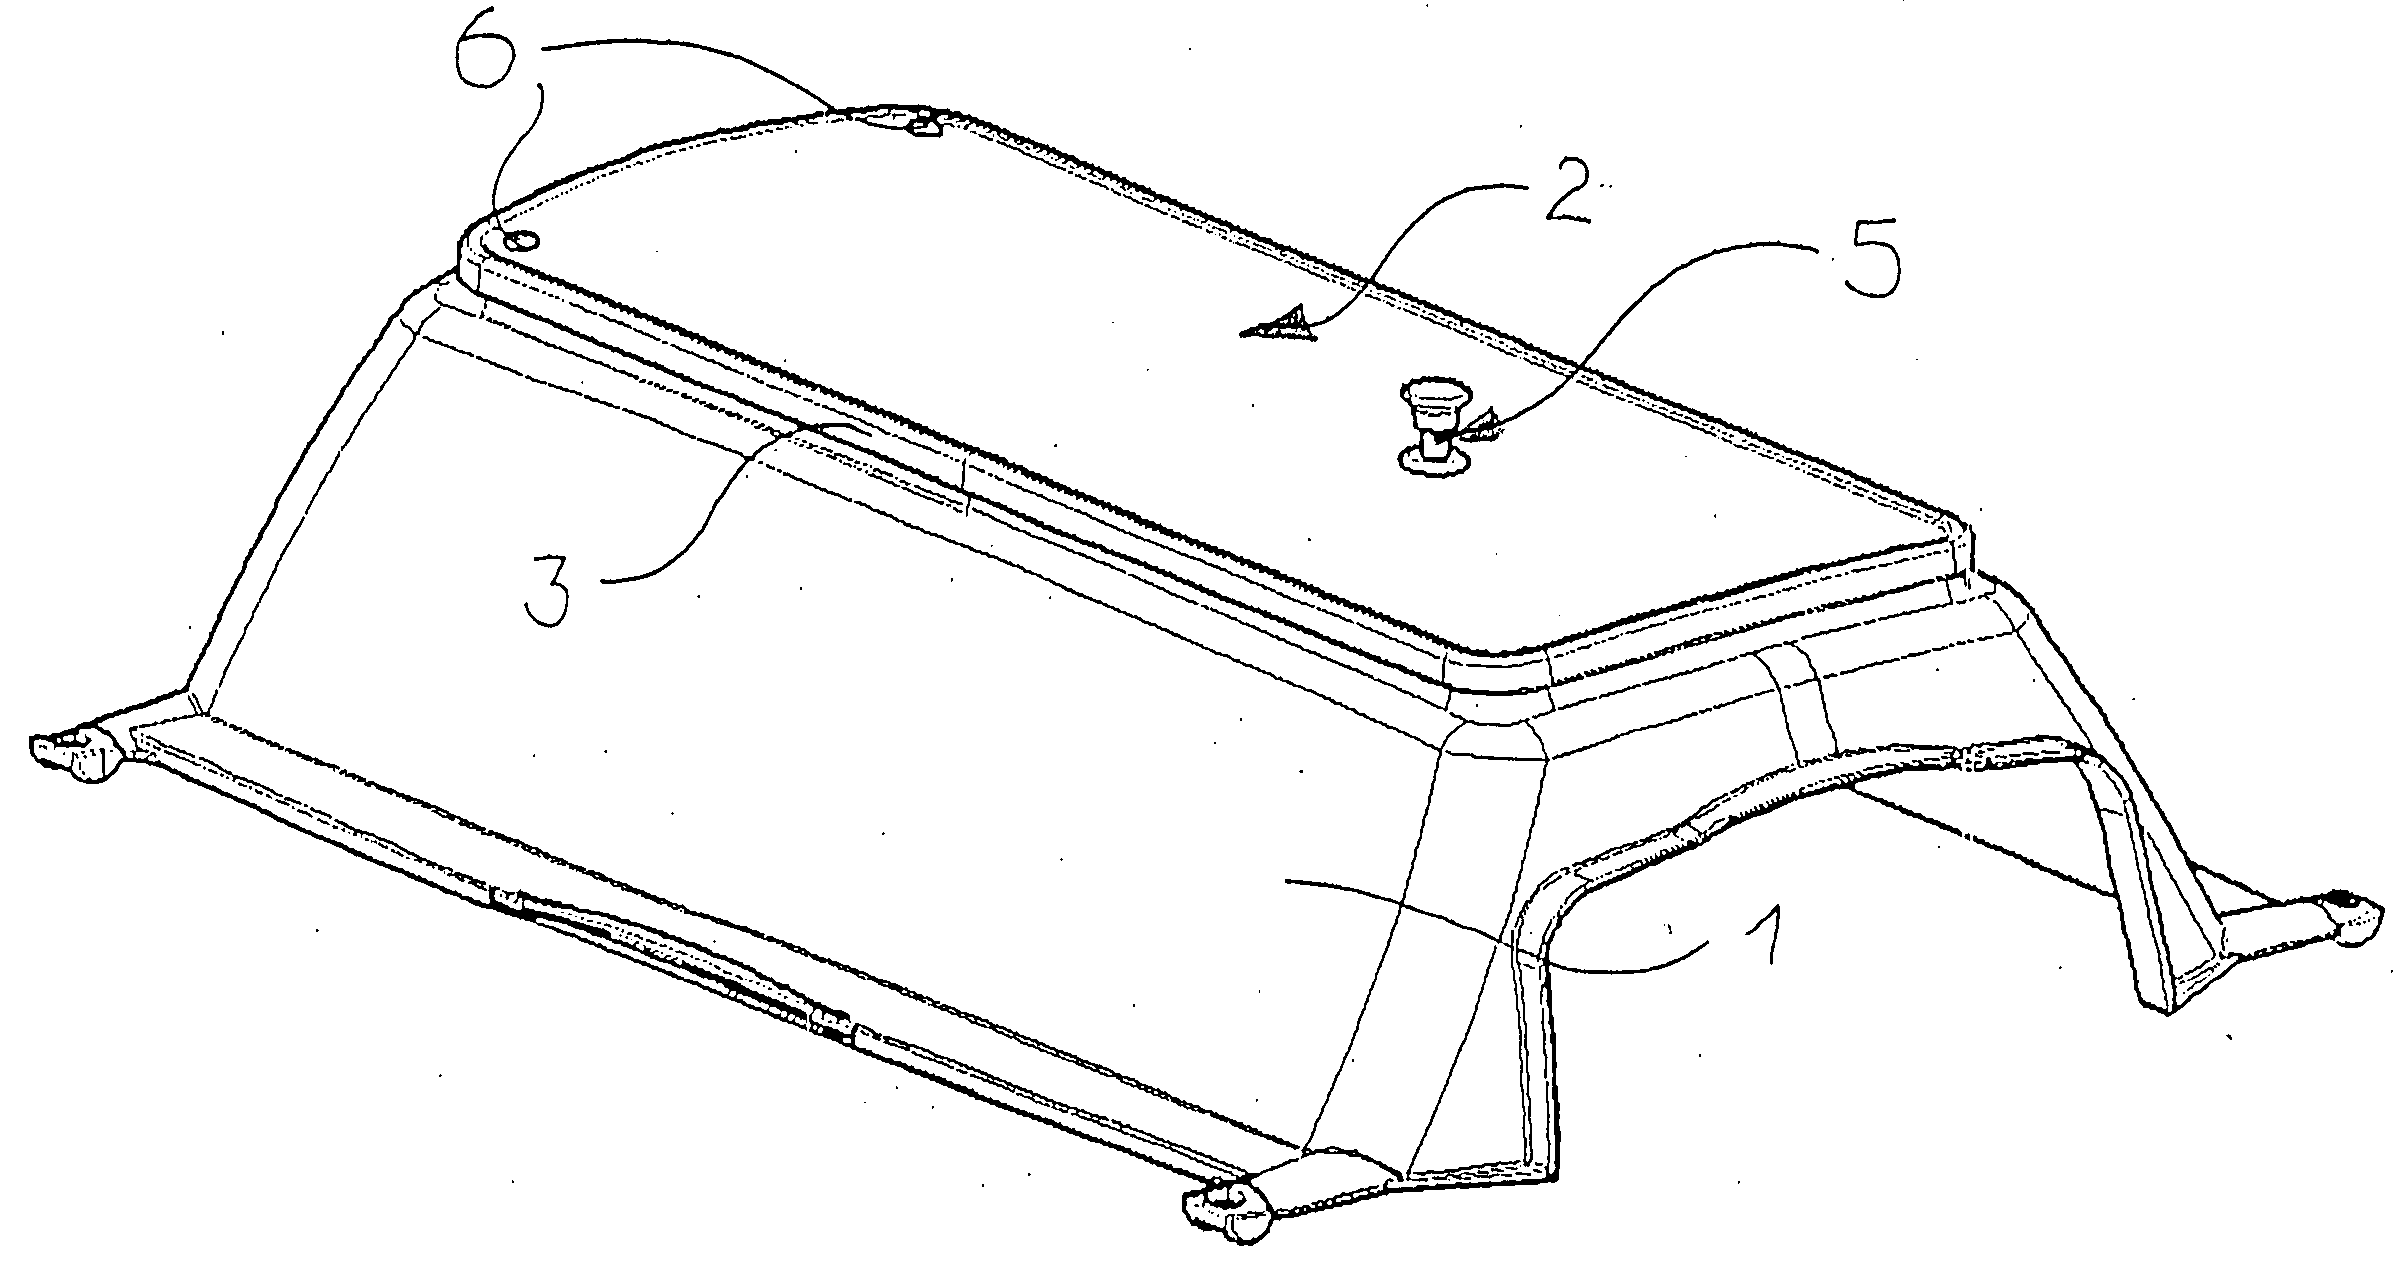 Hood with a double wall for a thermotherapy device